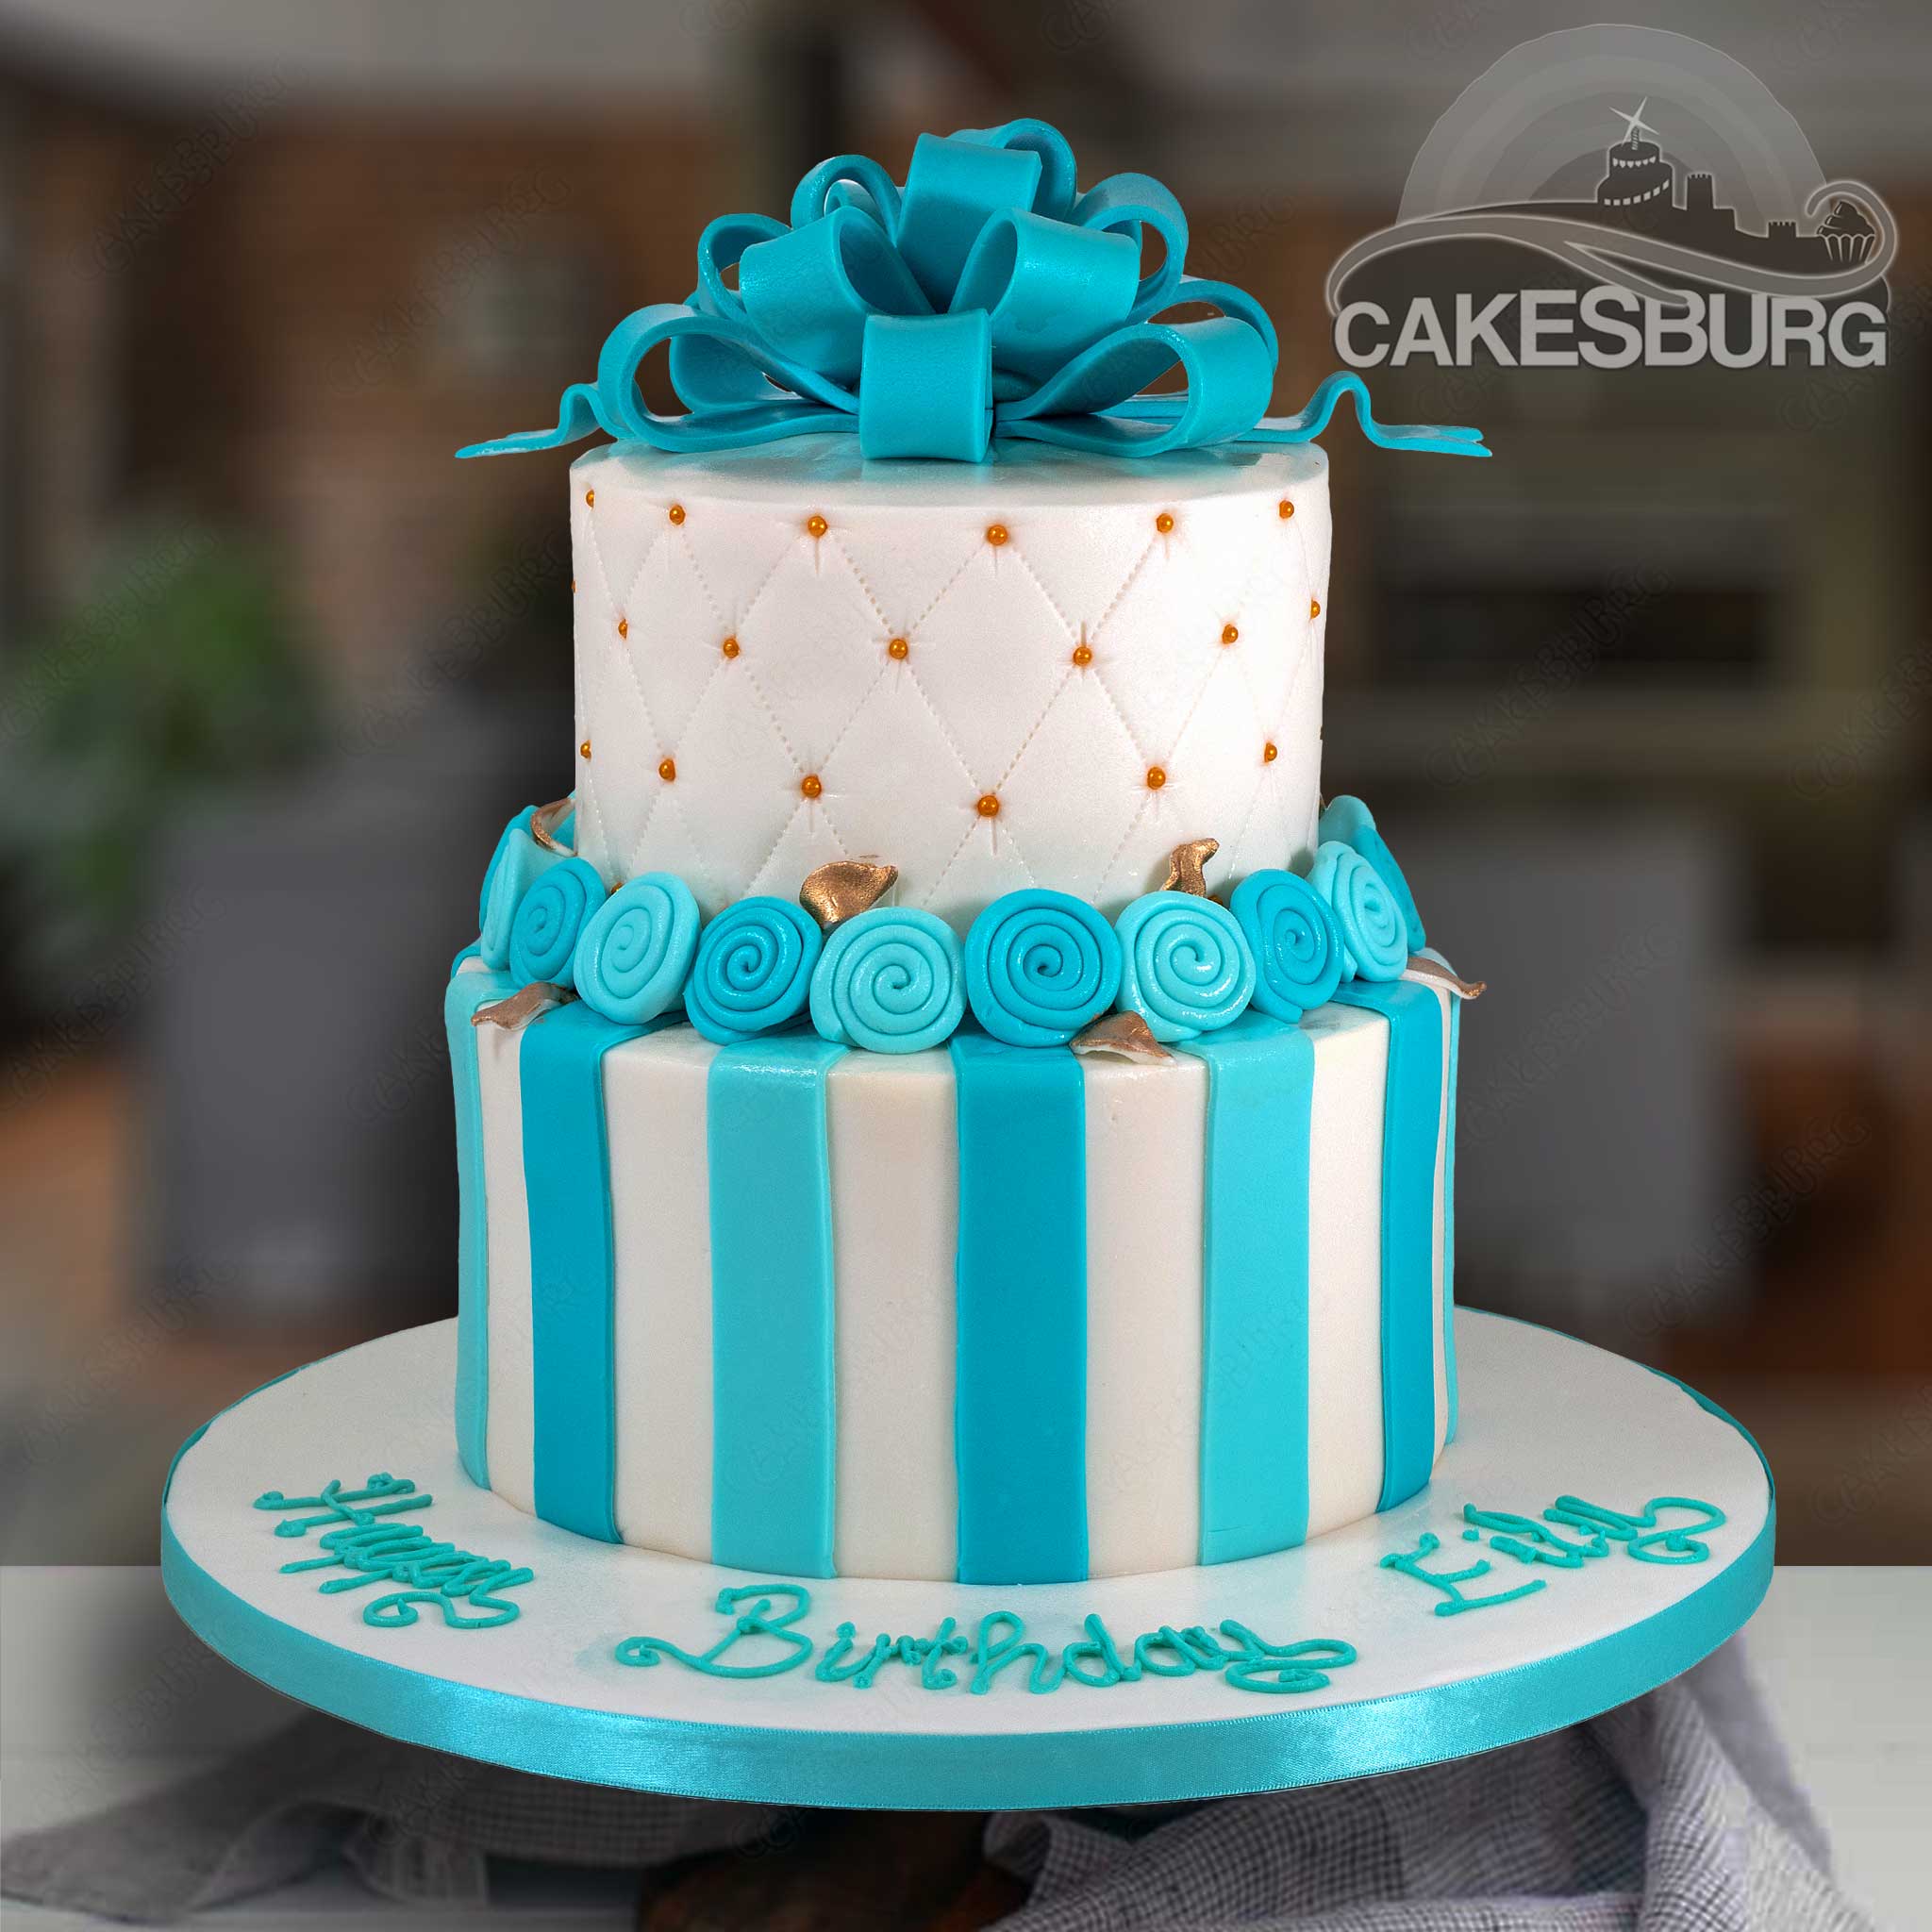 Cake & Bake !! We take orders for customised cake and special occasion cake..  | No bake cake, Occasion cakes, Special occasion cakes